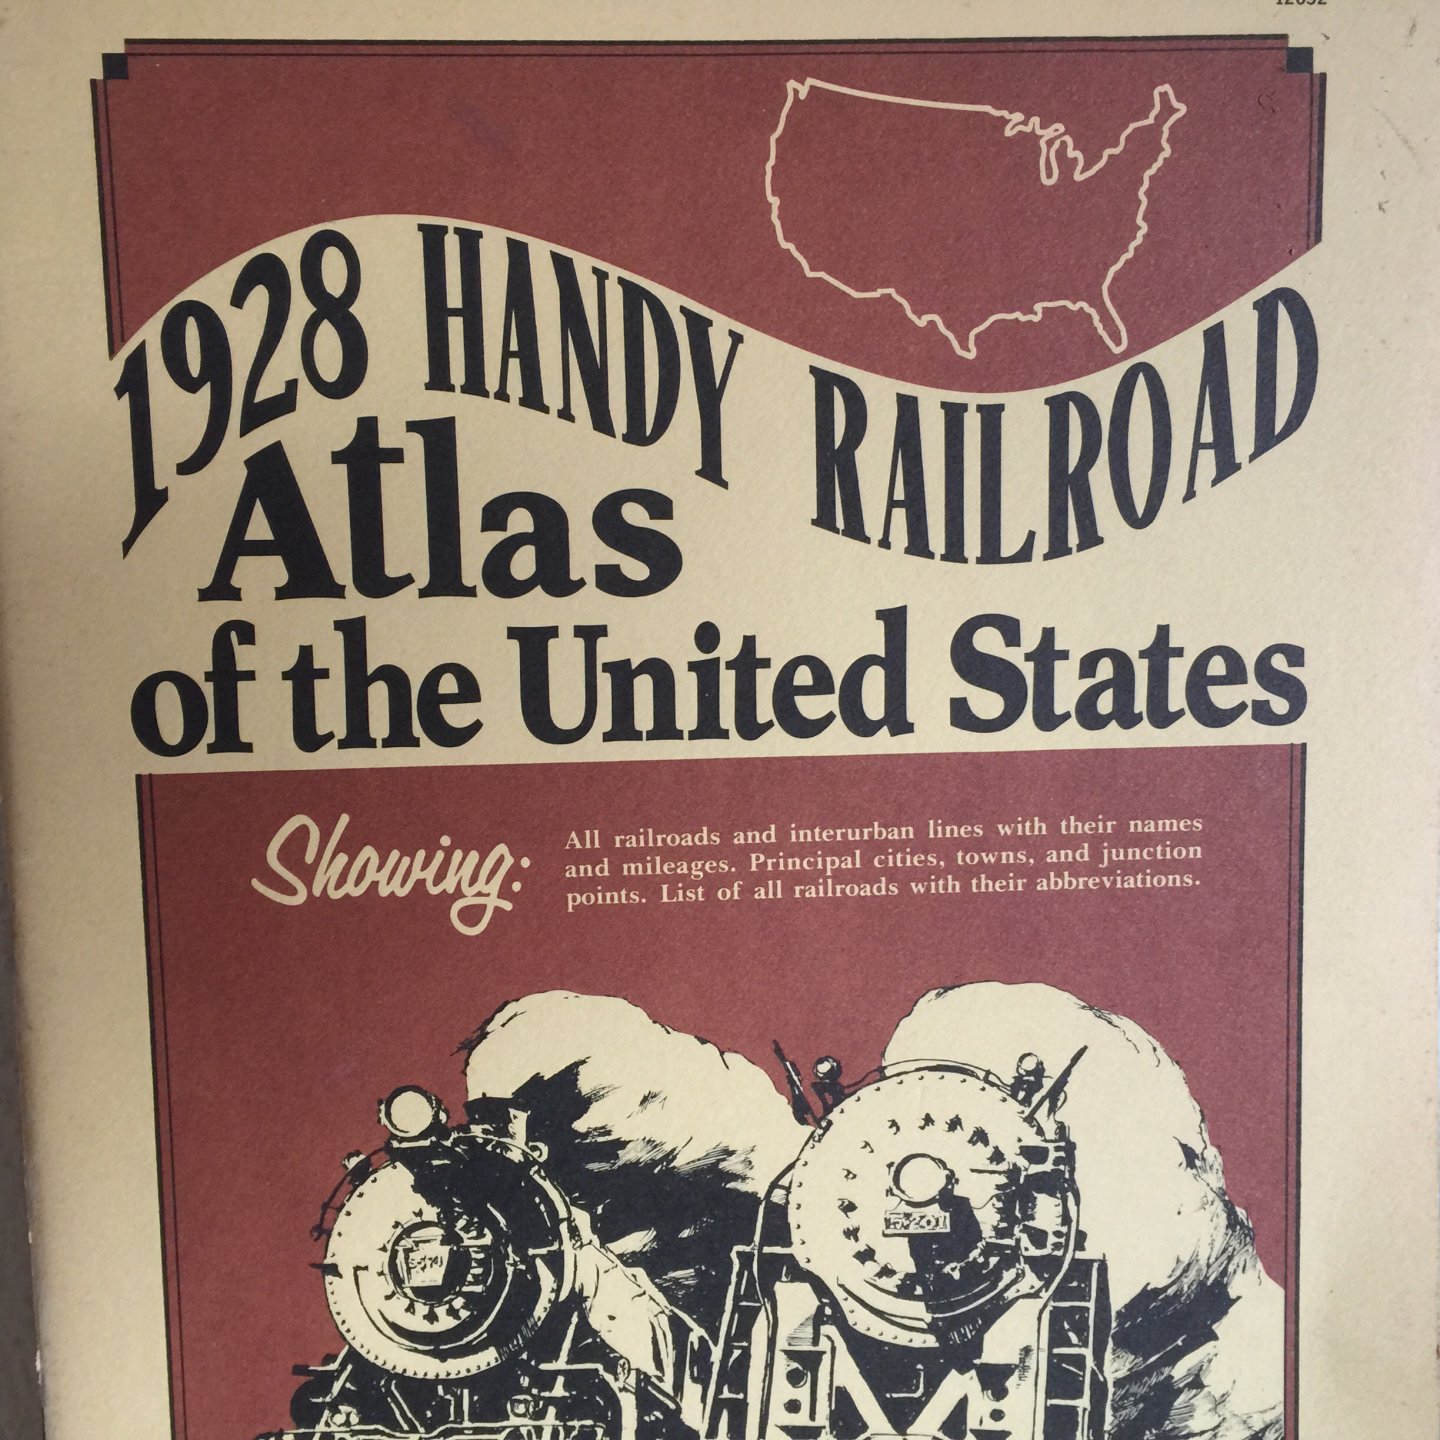  - 1928 HANDY RAILROAD ATLAS of the UNITED STATES